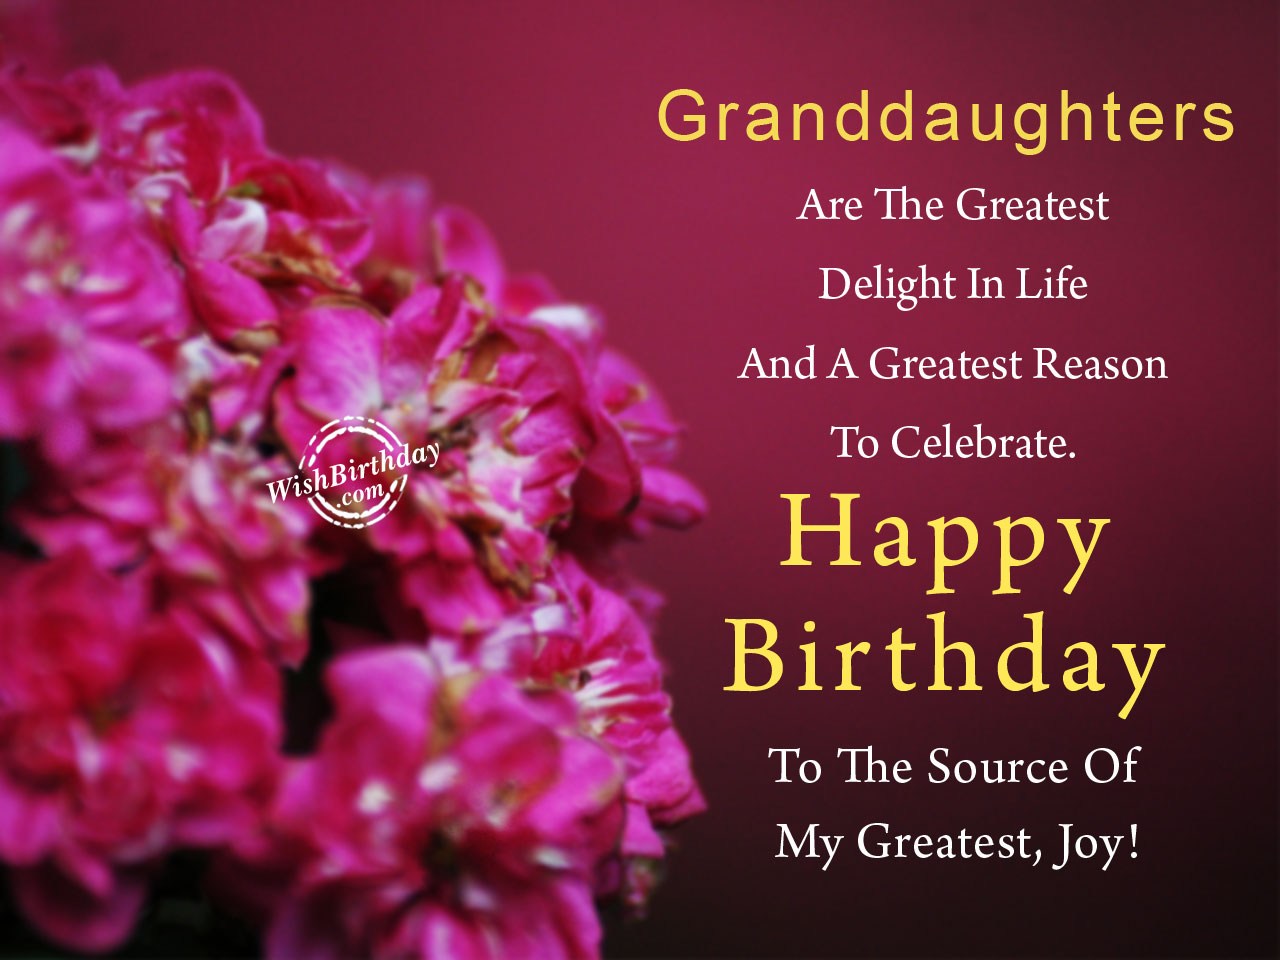 granddaughters-are-the-greatest-delight-in-life-happy-birthday